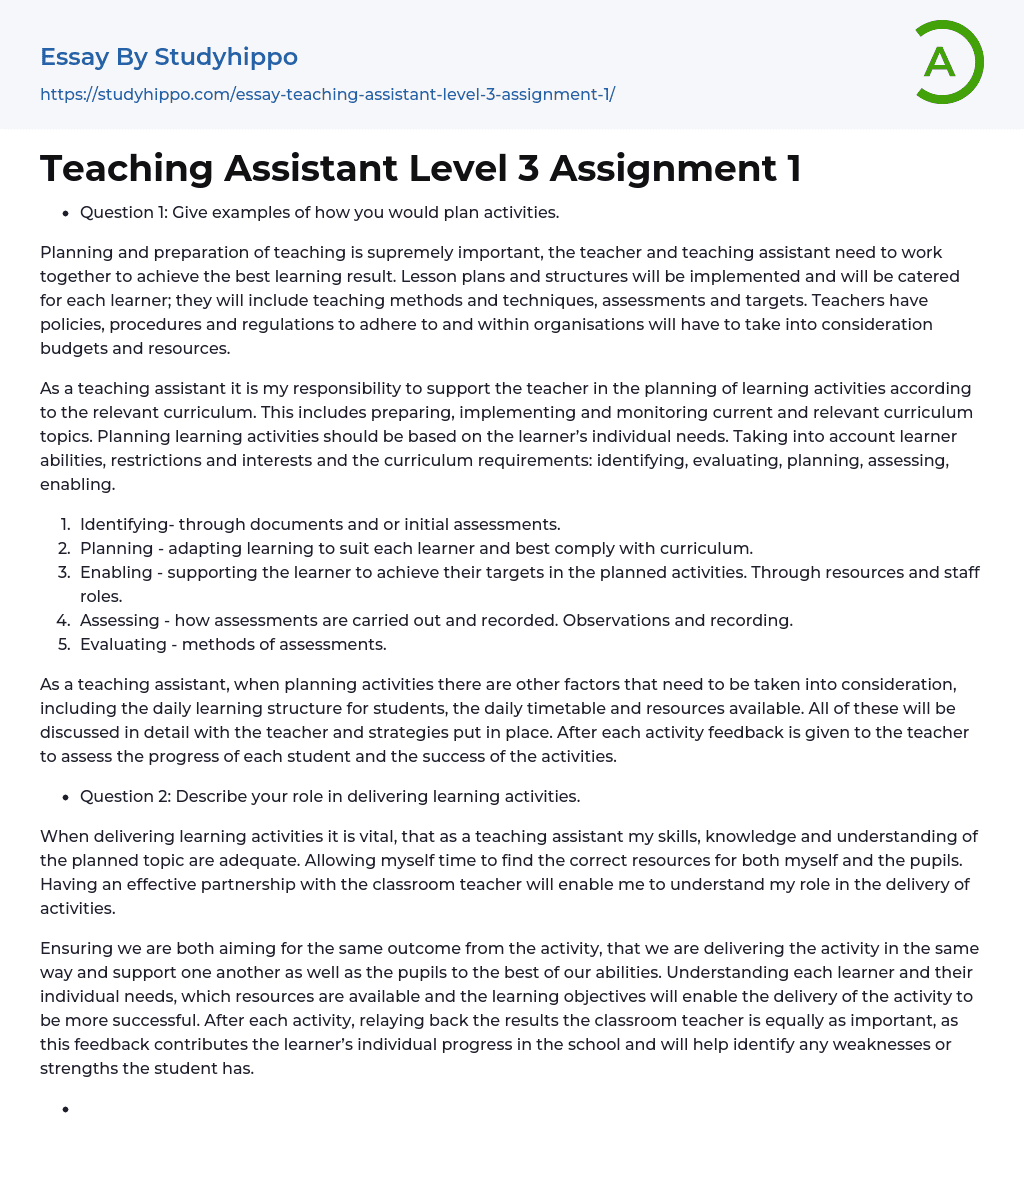 aet level 3 assignment examples